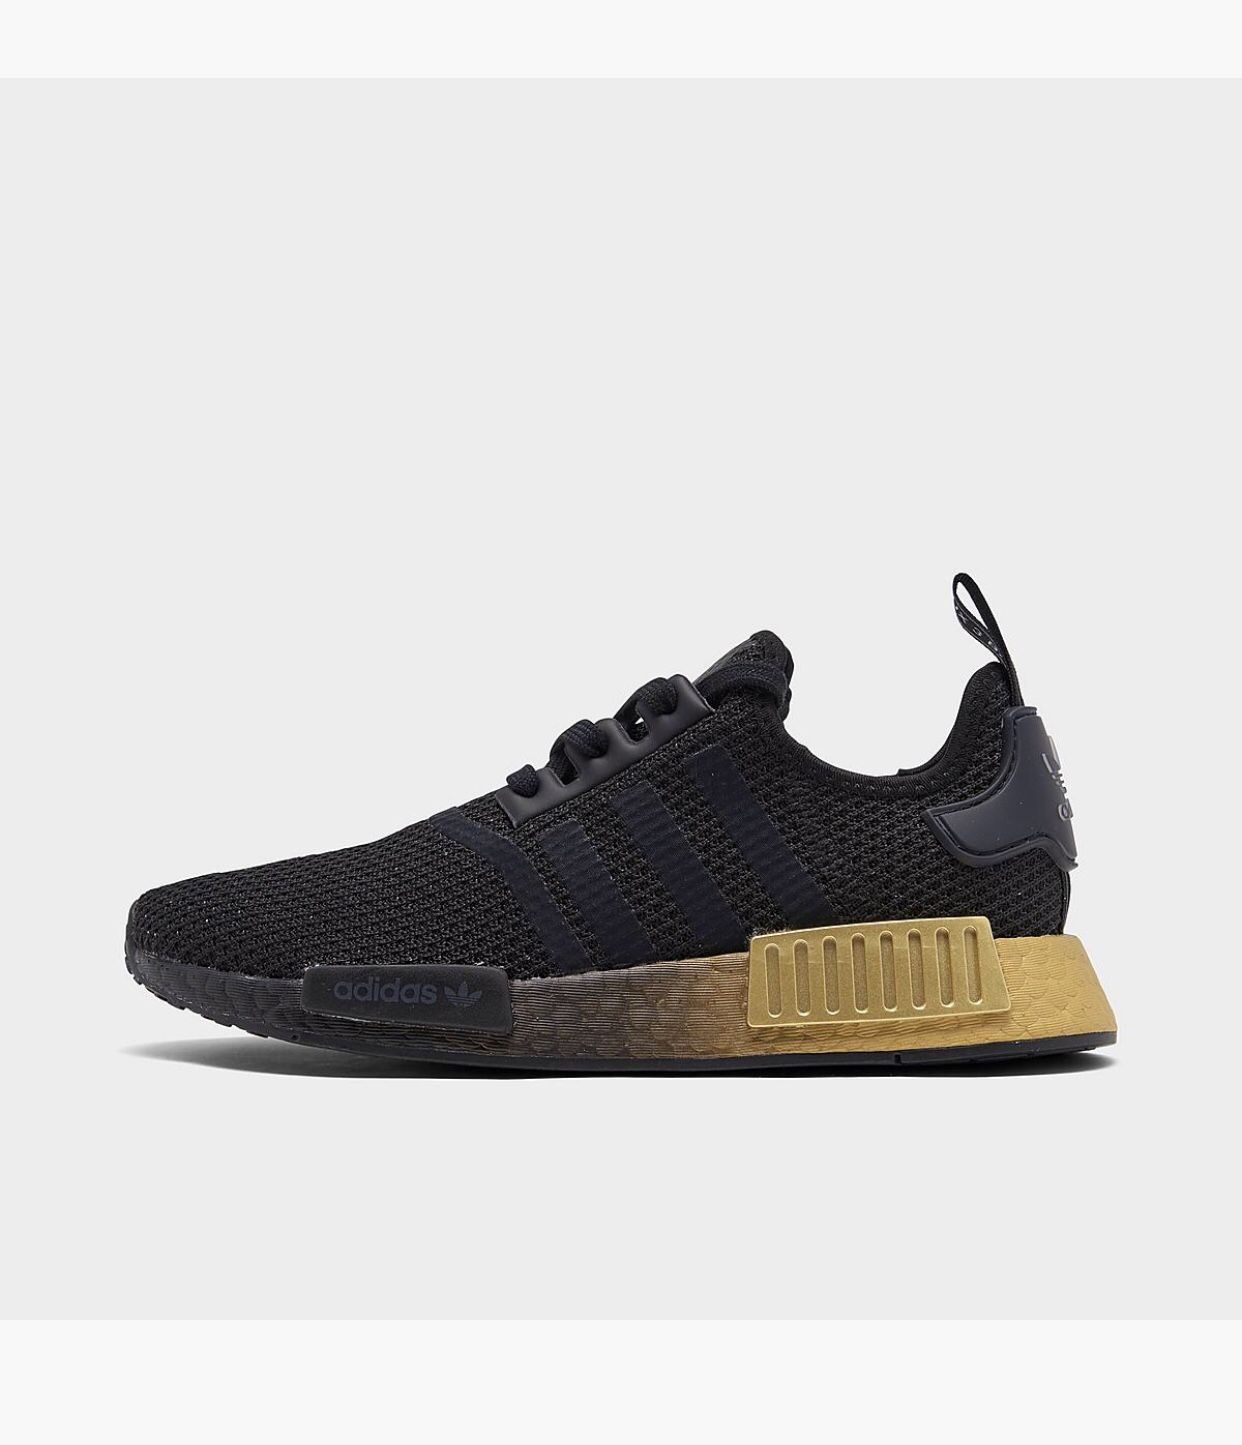 NMD-R1 adidas for women size 9